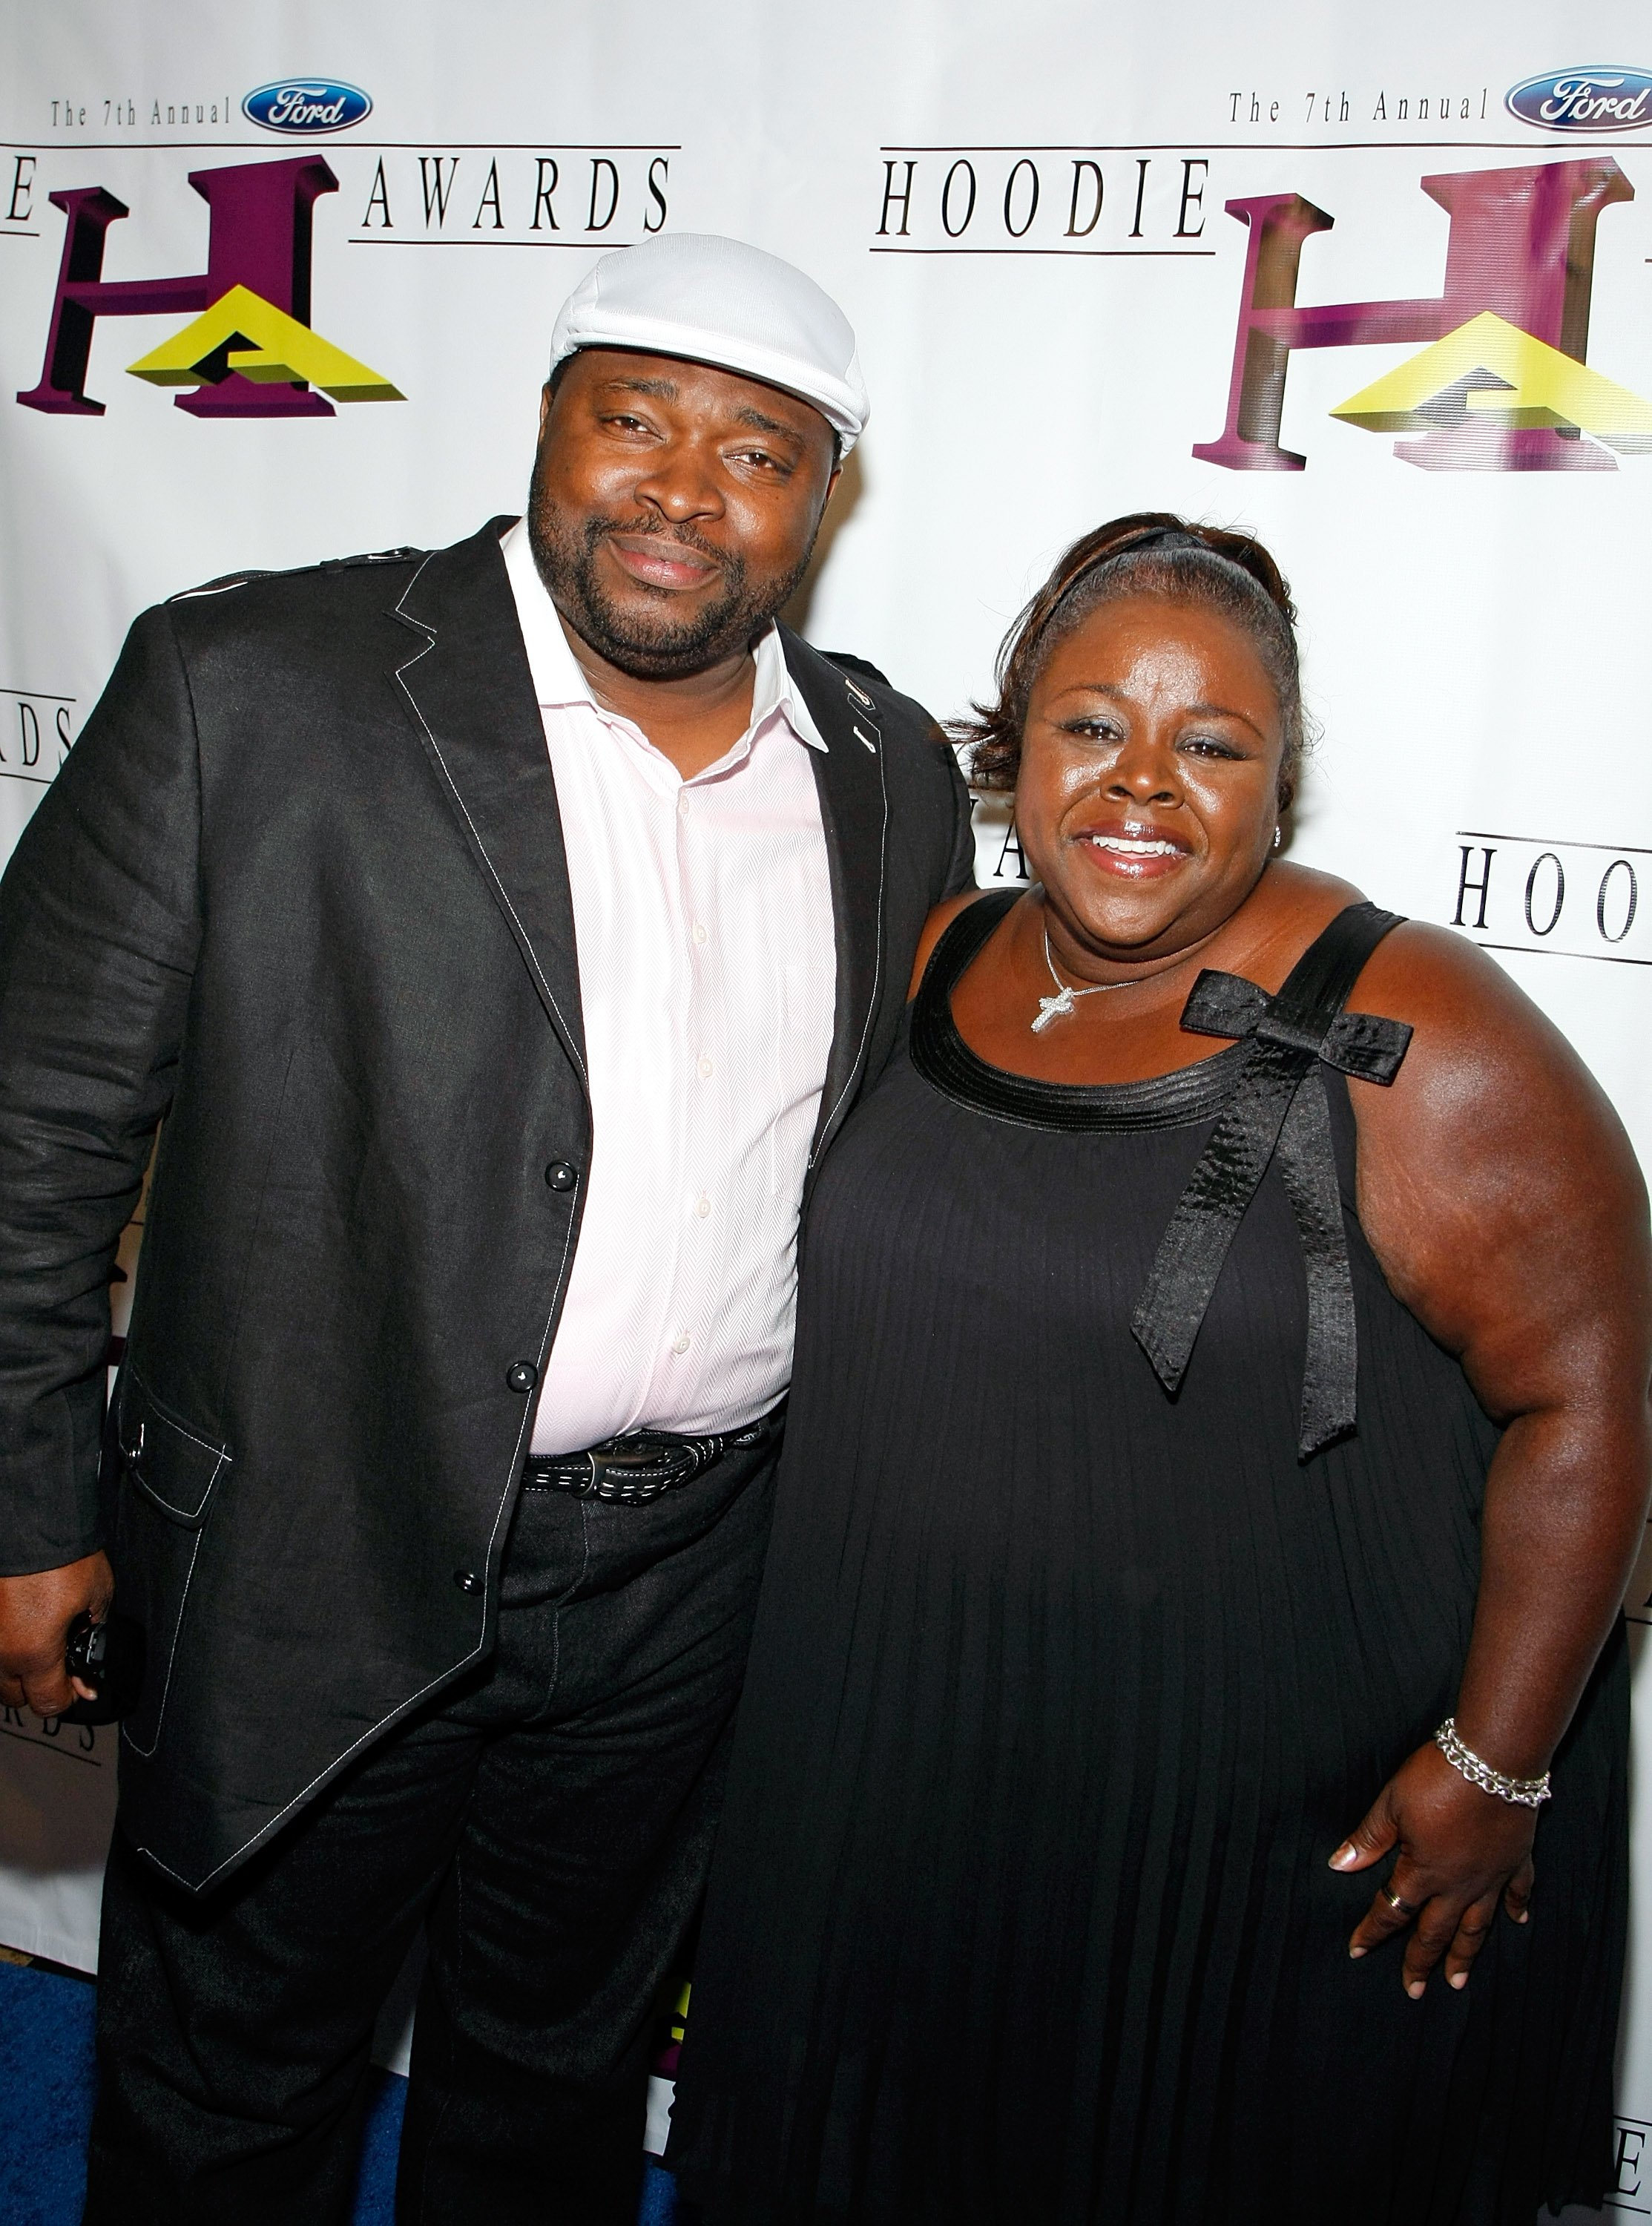 LaVan Davis and Cassi Davis at the 7th annual Hoodie Awards on August 15, 2009 in Las Vegas, Nevada. | Source: Getty Images